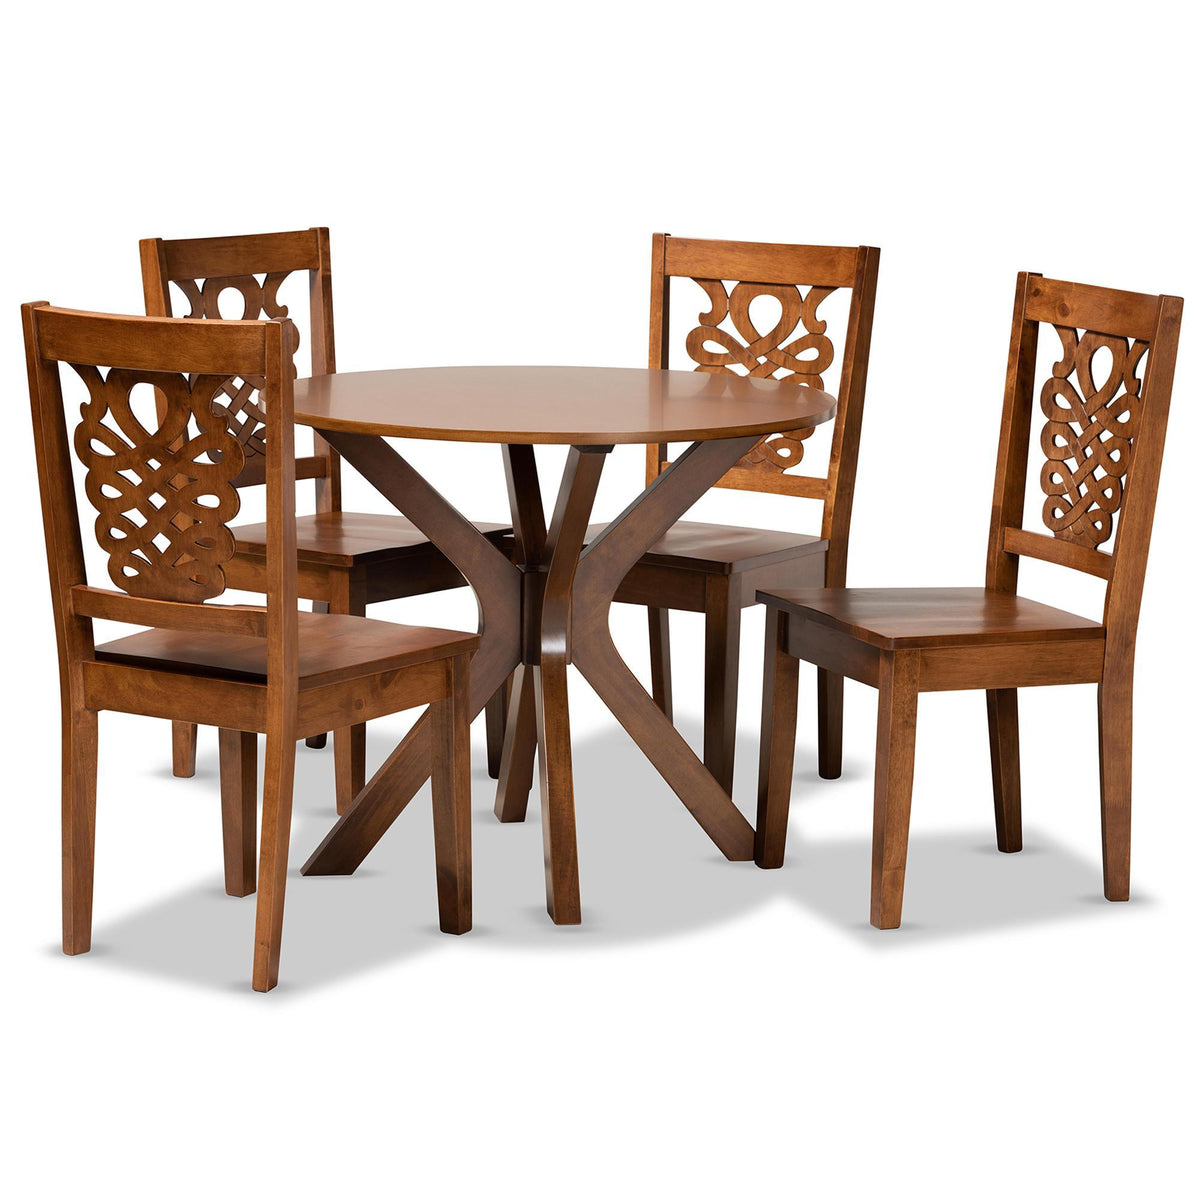 Baxton Studio Liese Modern And Contemporary Transitional Walnut Brown Finished Wood 5-Piece Dining Set - Liese-Walnut-5PC Dining Set